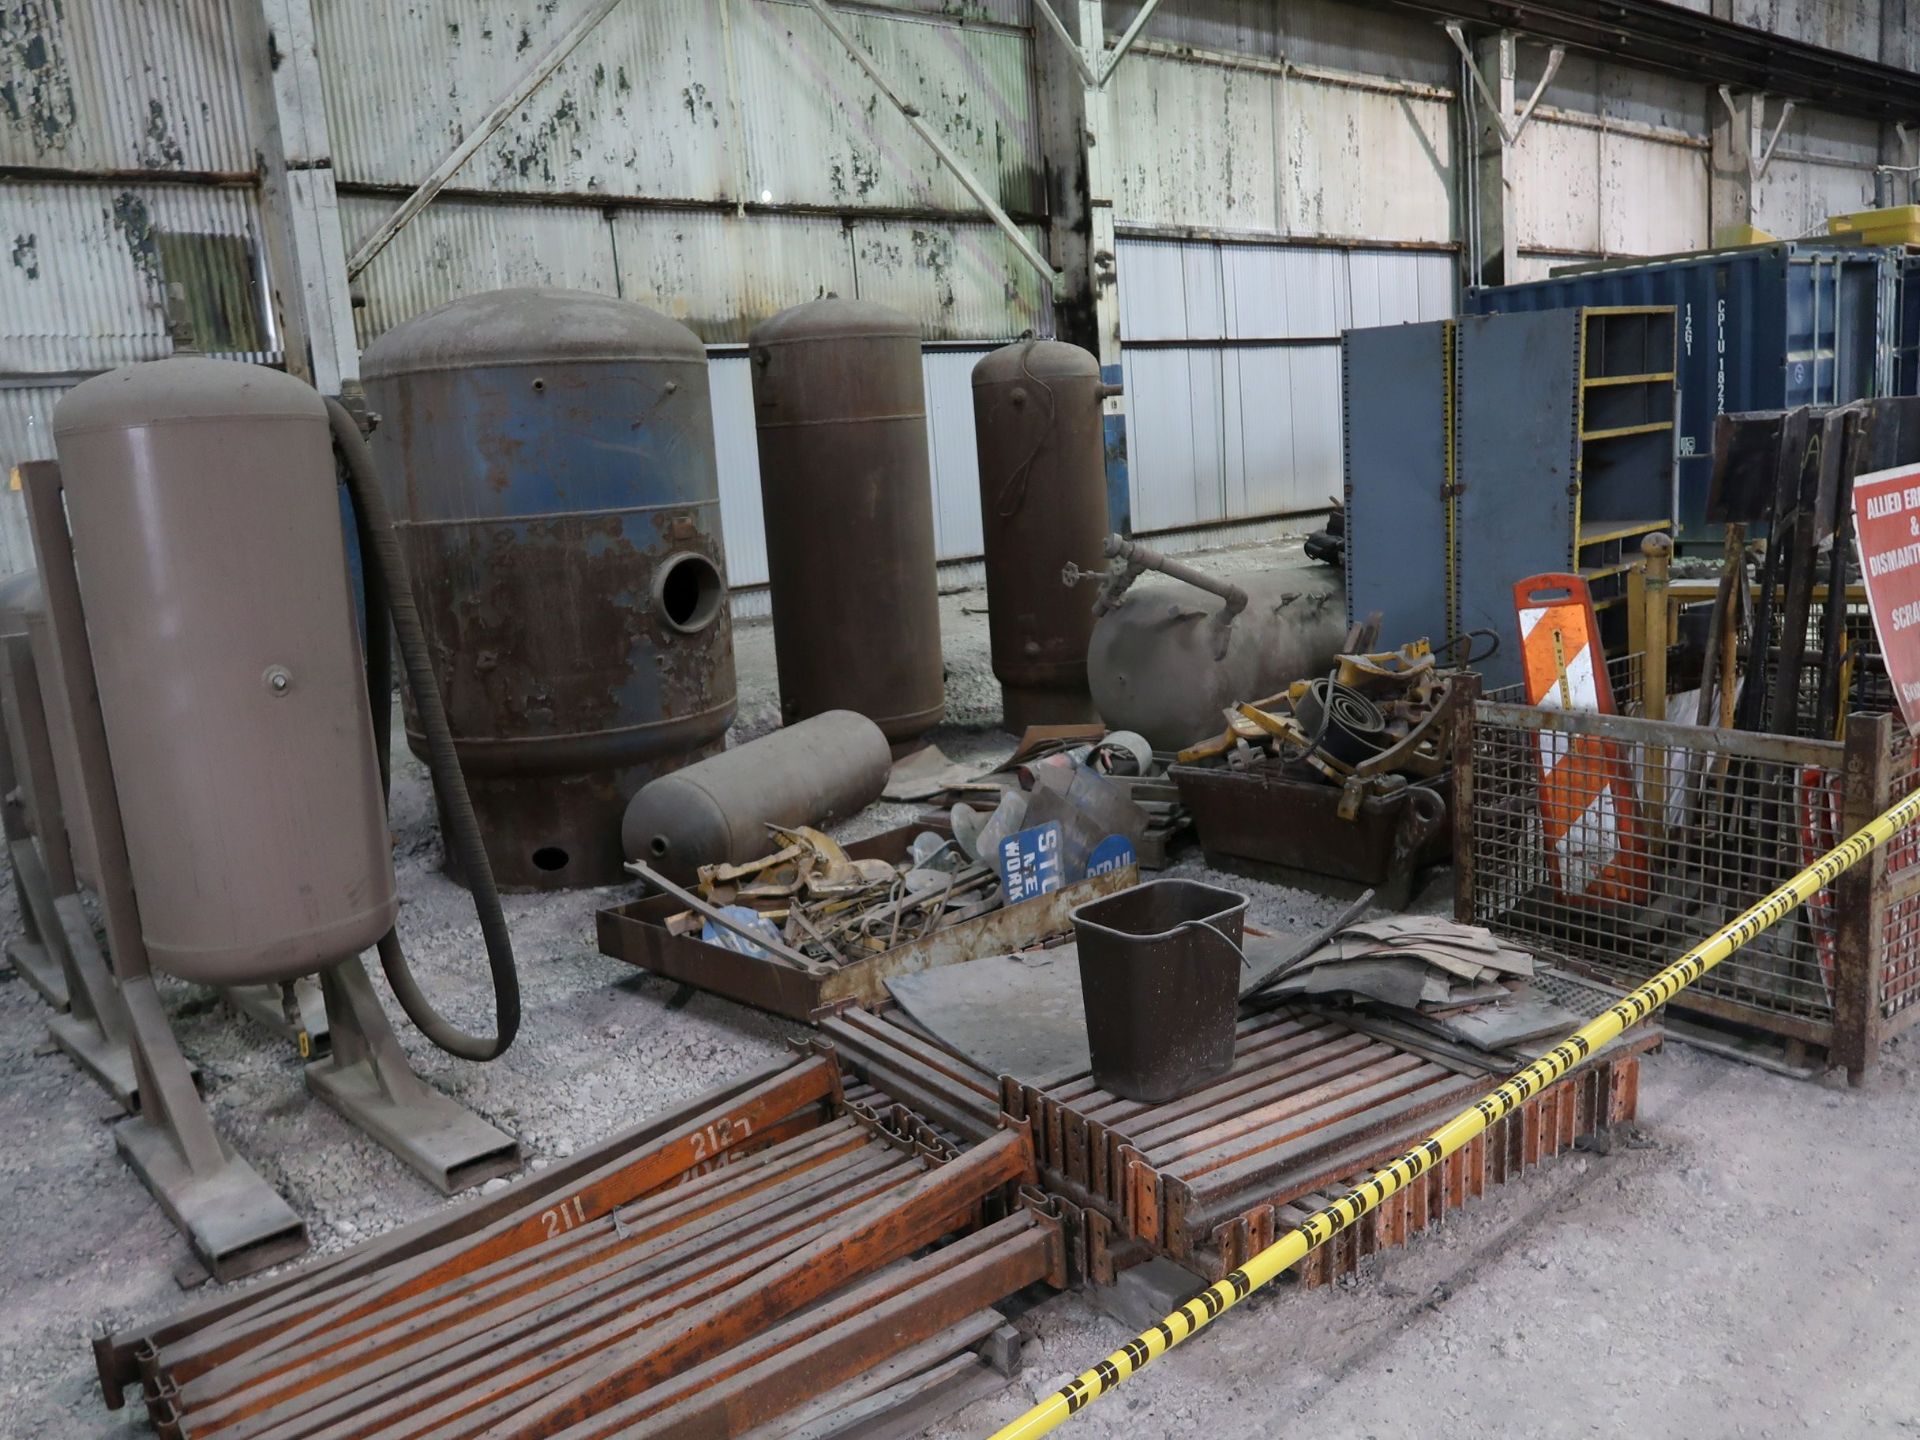 (LOT) LARGE QUANTITY OF STEEL ITEMS - TANKS, WIRE BASKETS, DISASSEMBLEDE RACK, STEEL TUBS, STEEL - Image 2 of 3